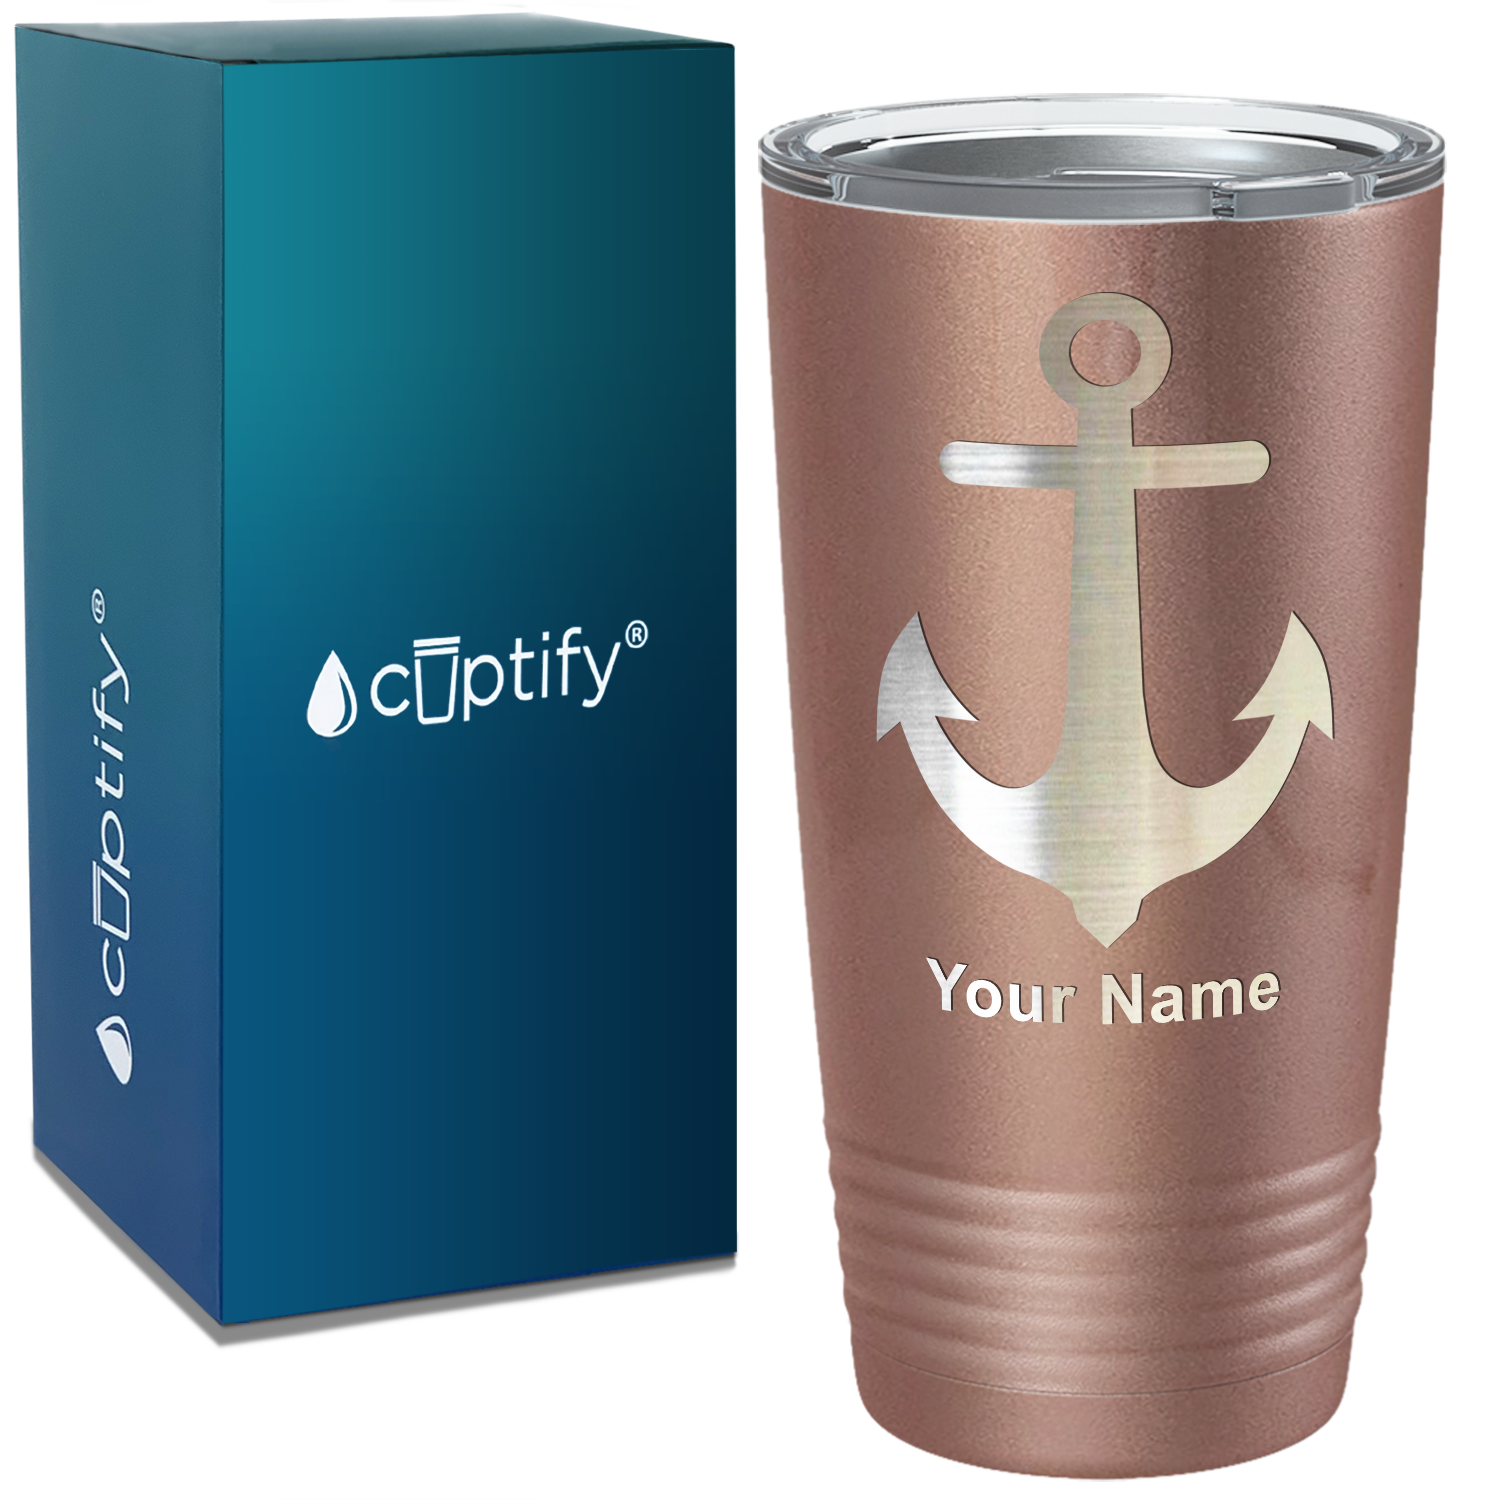 Anchor Tumbler-Boating Accessories for Boat,Lake Accessories  for women-Beach Gifts,Boat gifts,Boating Gifts for Women,Anchor Gifts for  Women-Anchor decor,Anchor Navy Blue-Anchor cups,Mug,Cup Anchor: Tumblers &  Water Glasses